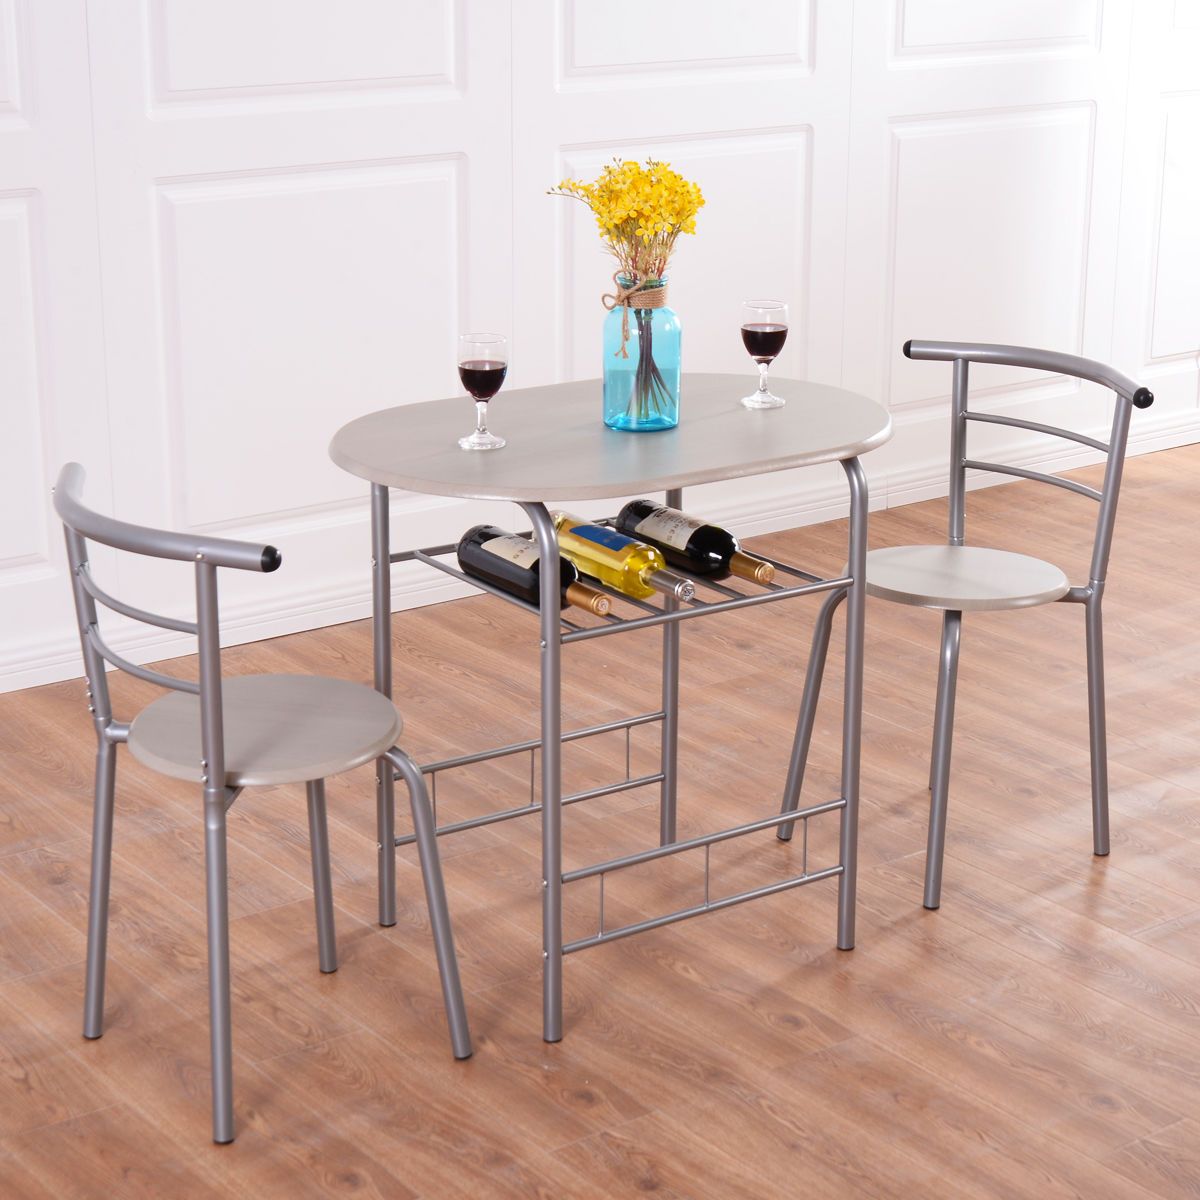 Costway 3 Piece Dining Set Table 2 Chairs Bistro Pub Home Kitchen With Regard To 3 Piece Bistro Dining Sets (View 5 of 15)